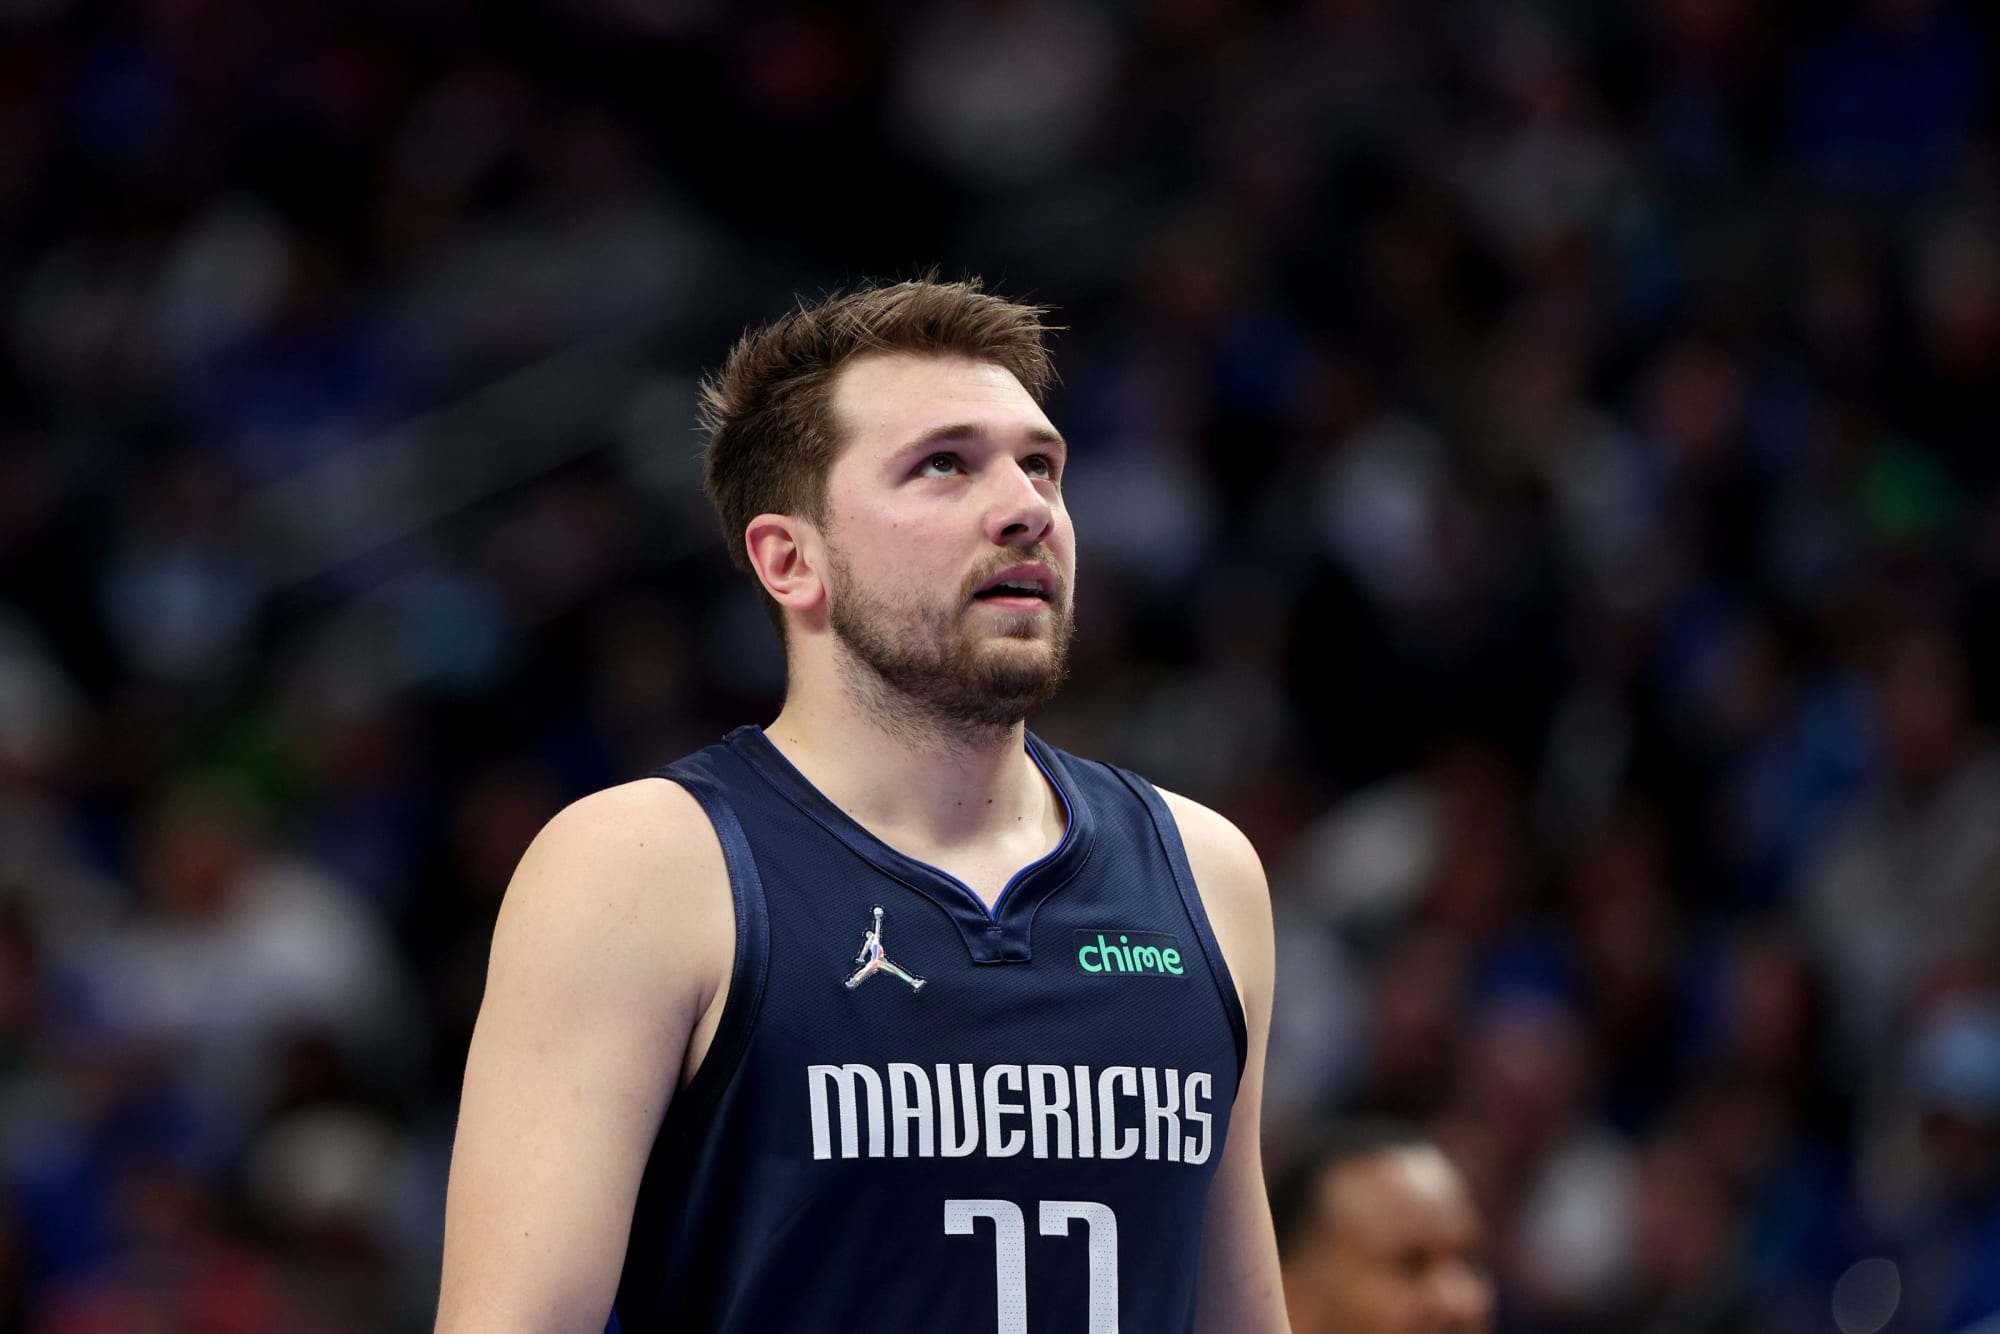 Dallas Mavericks: Down 2-0, it would be unwise to count out Luka Doncic